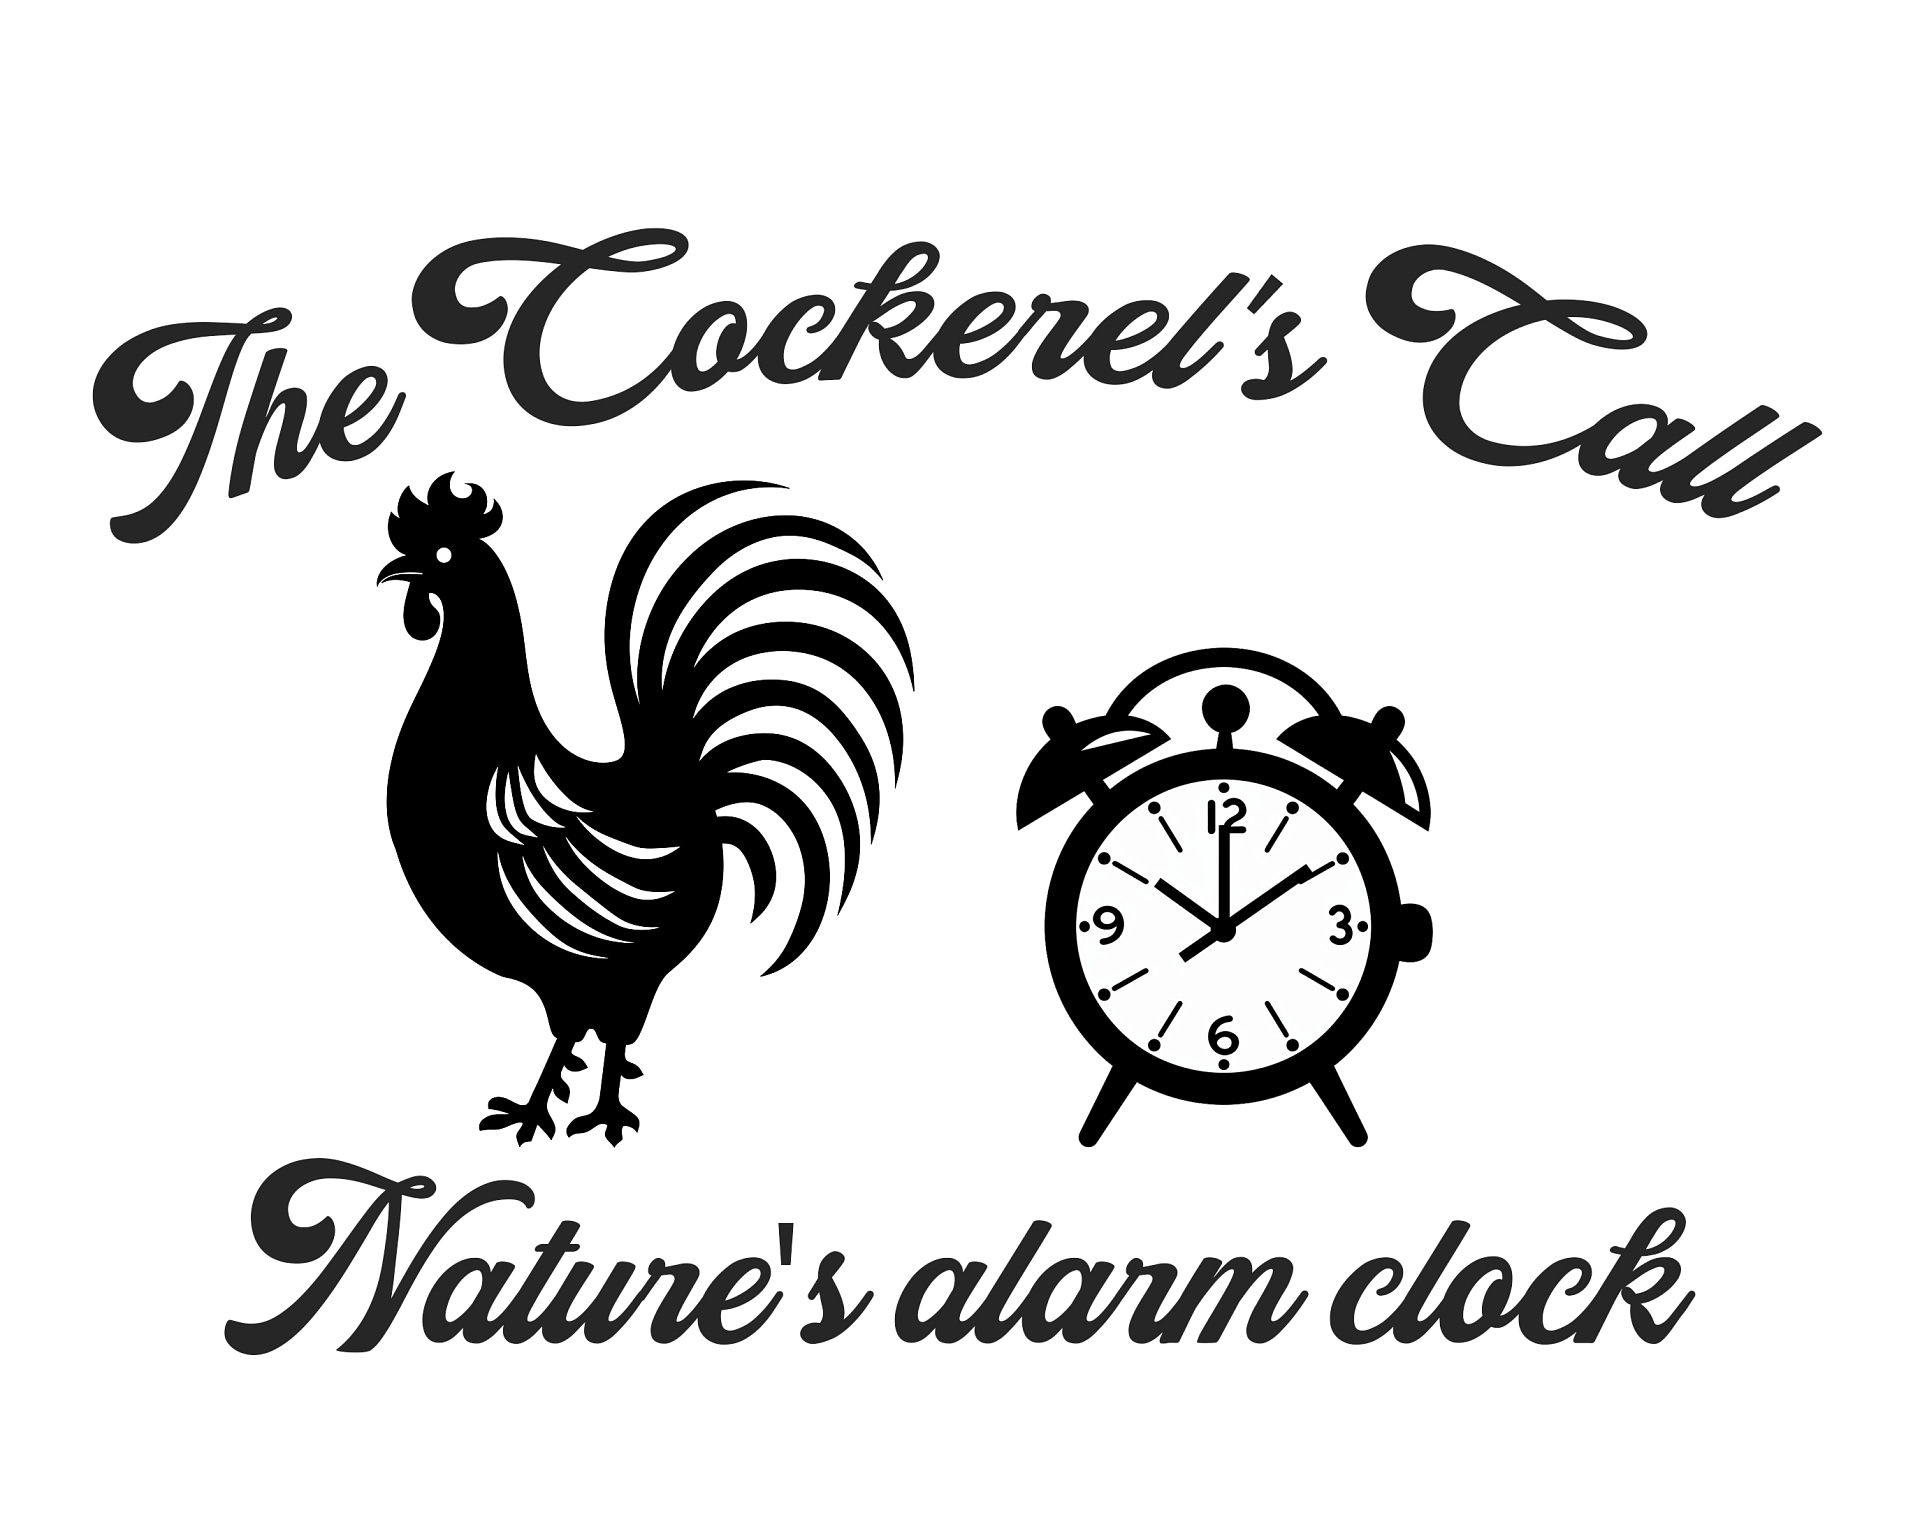 The Cockrels Call scaled